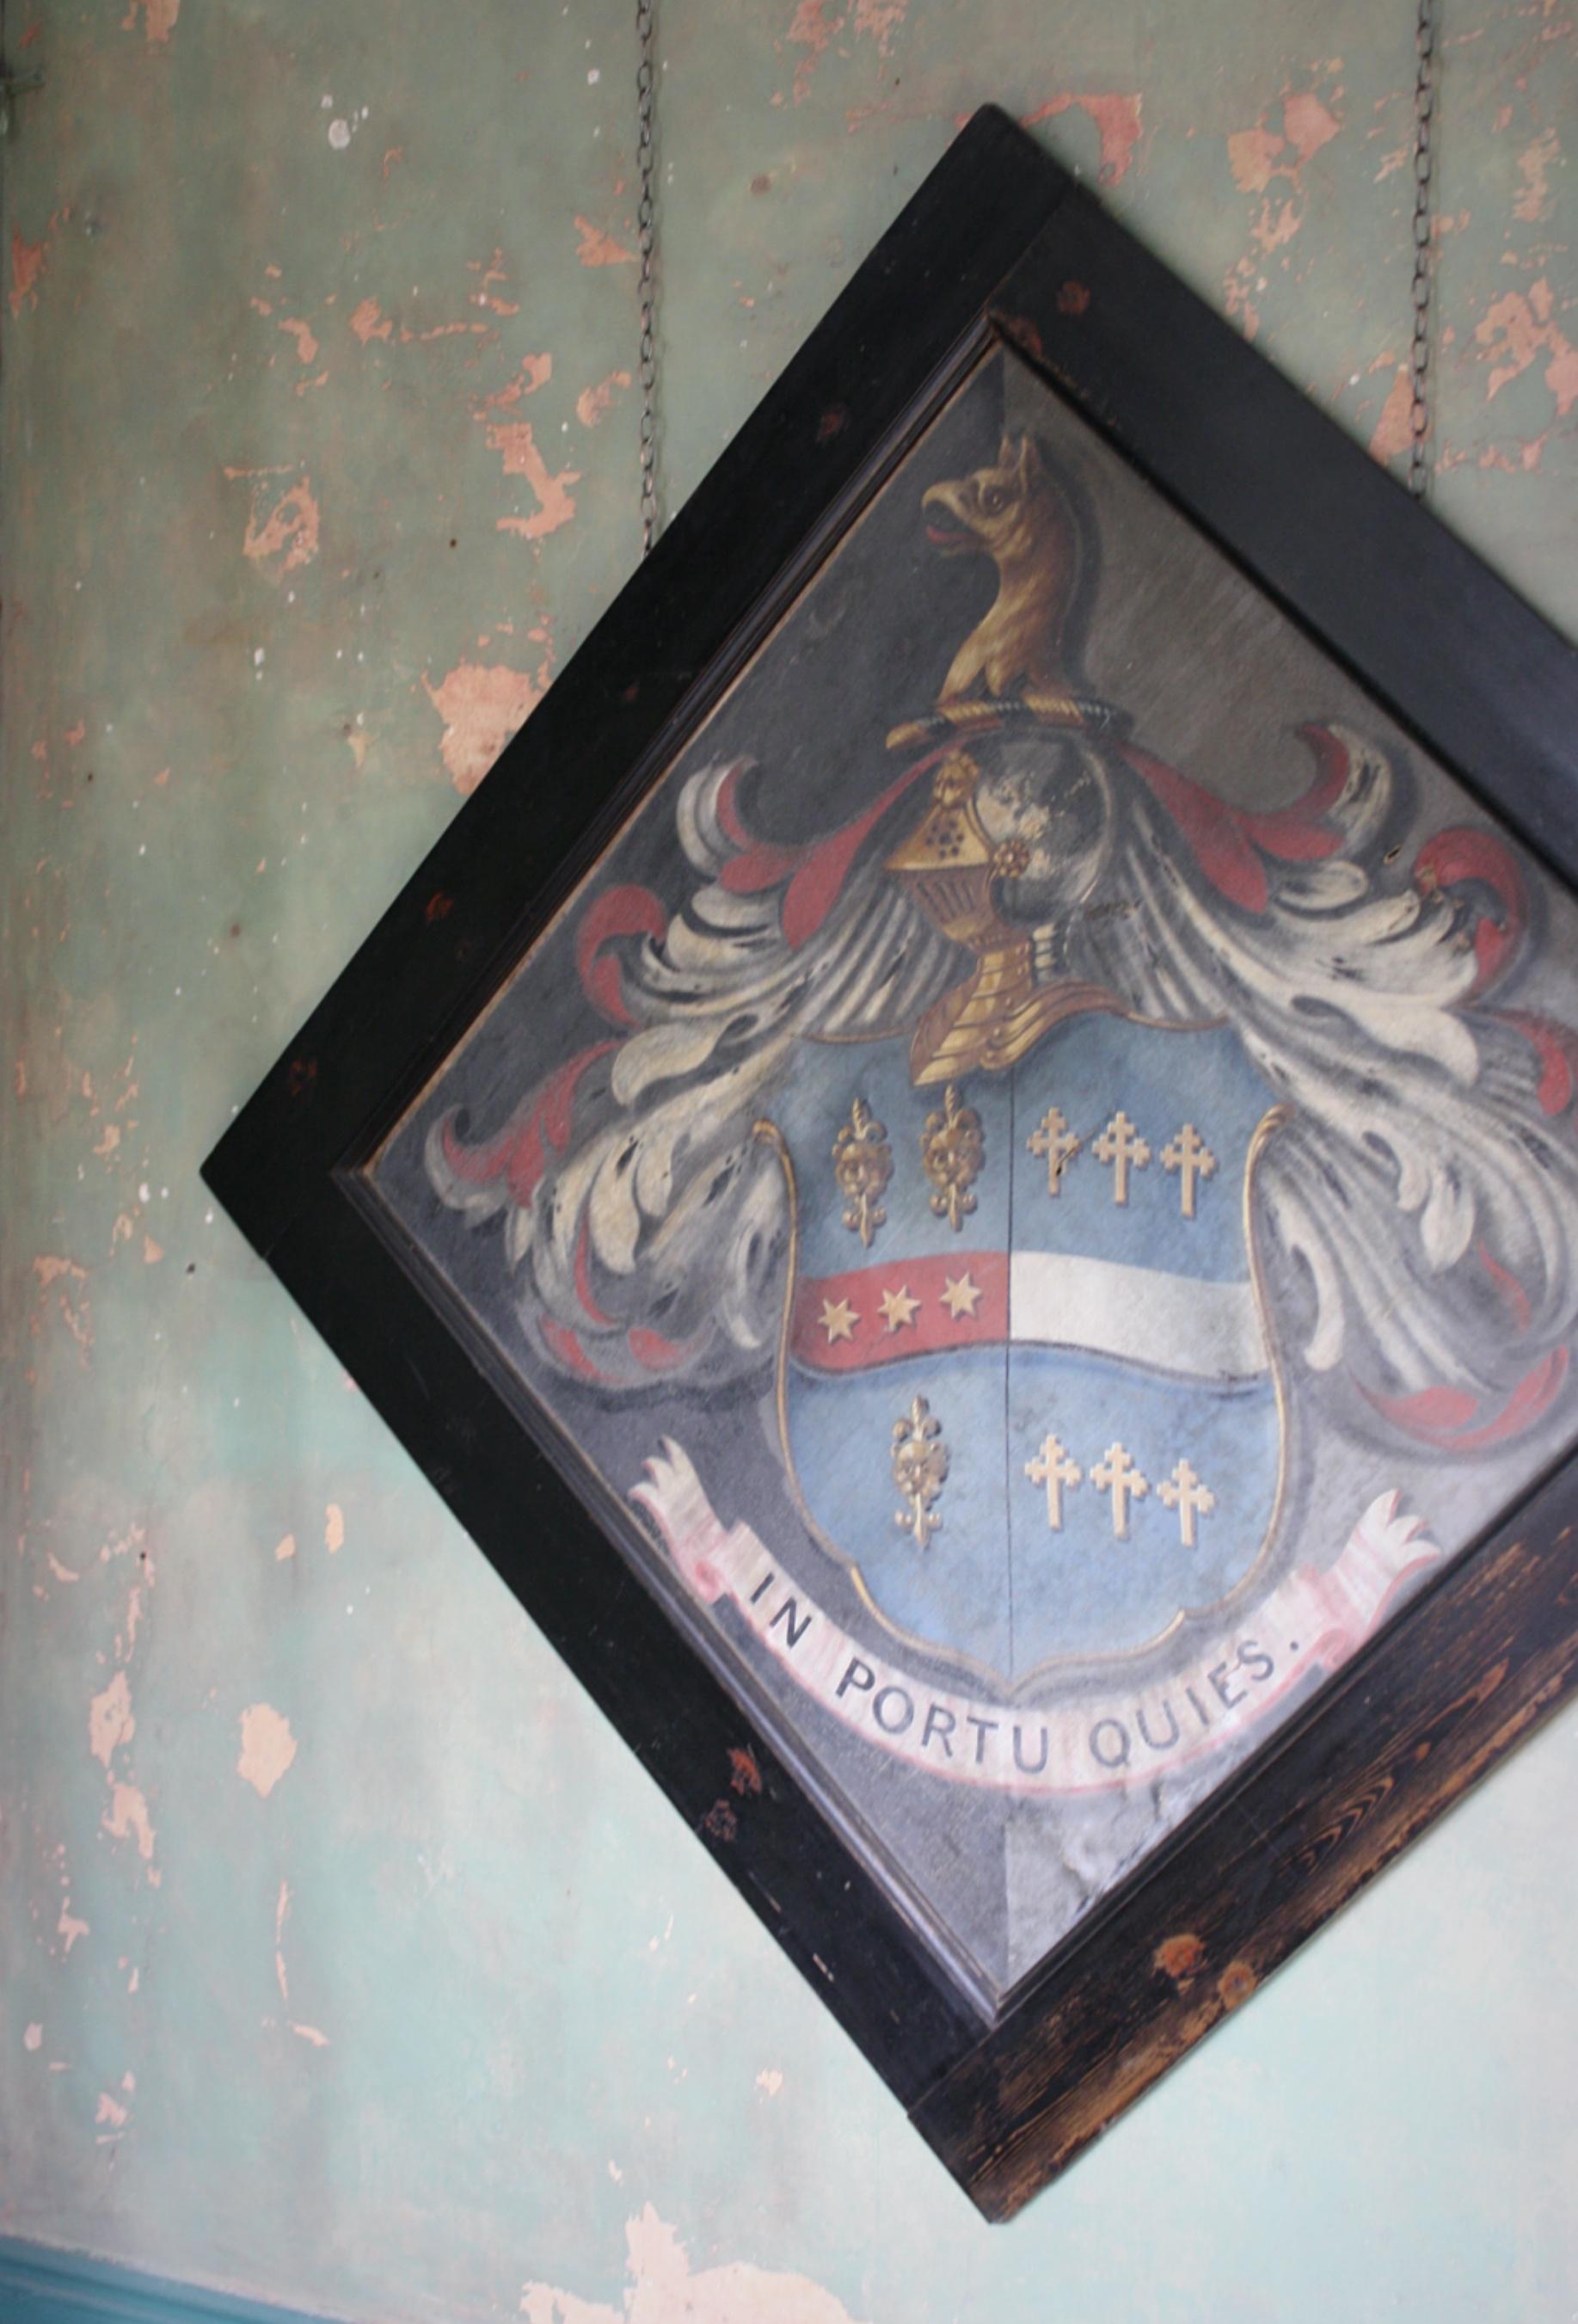 A highly decorative 18th century Hatchment of extra large proportions, the lozenged oil on canvas depicts a crest with the latin motto 